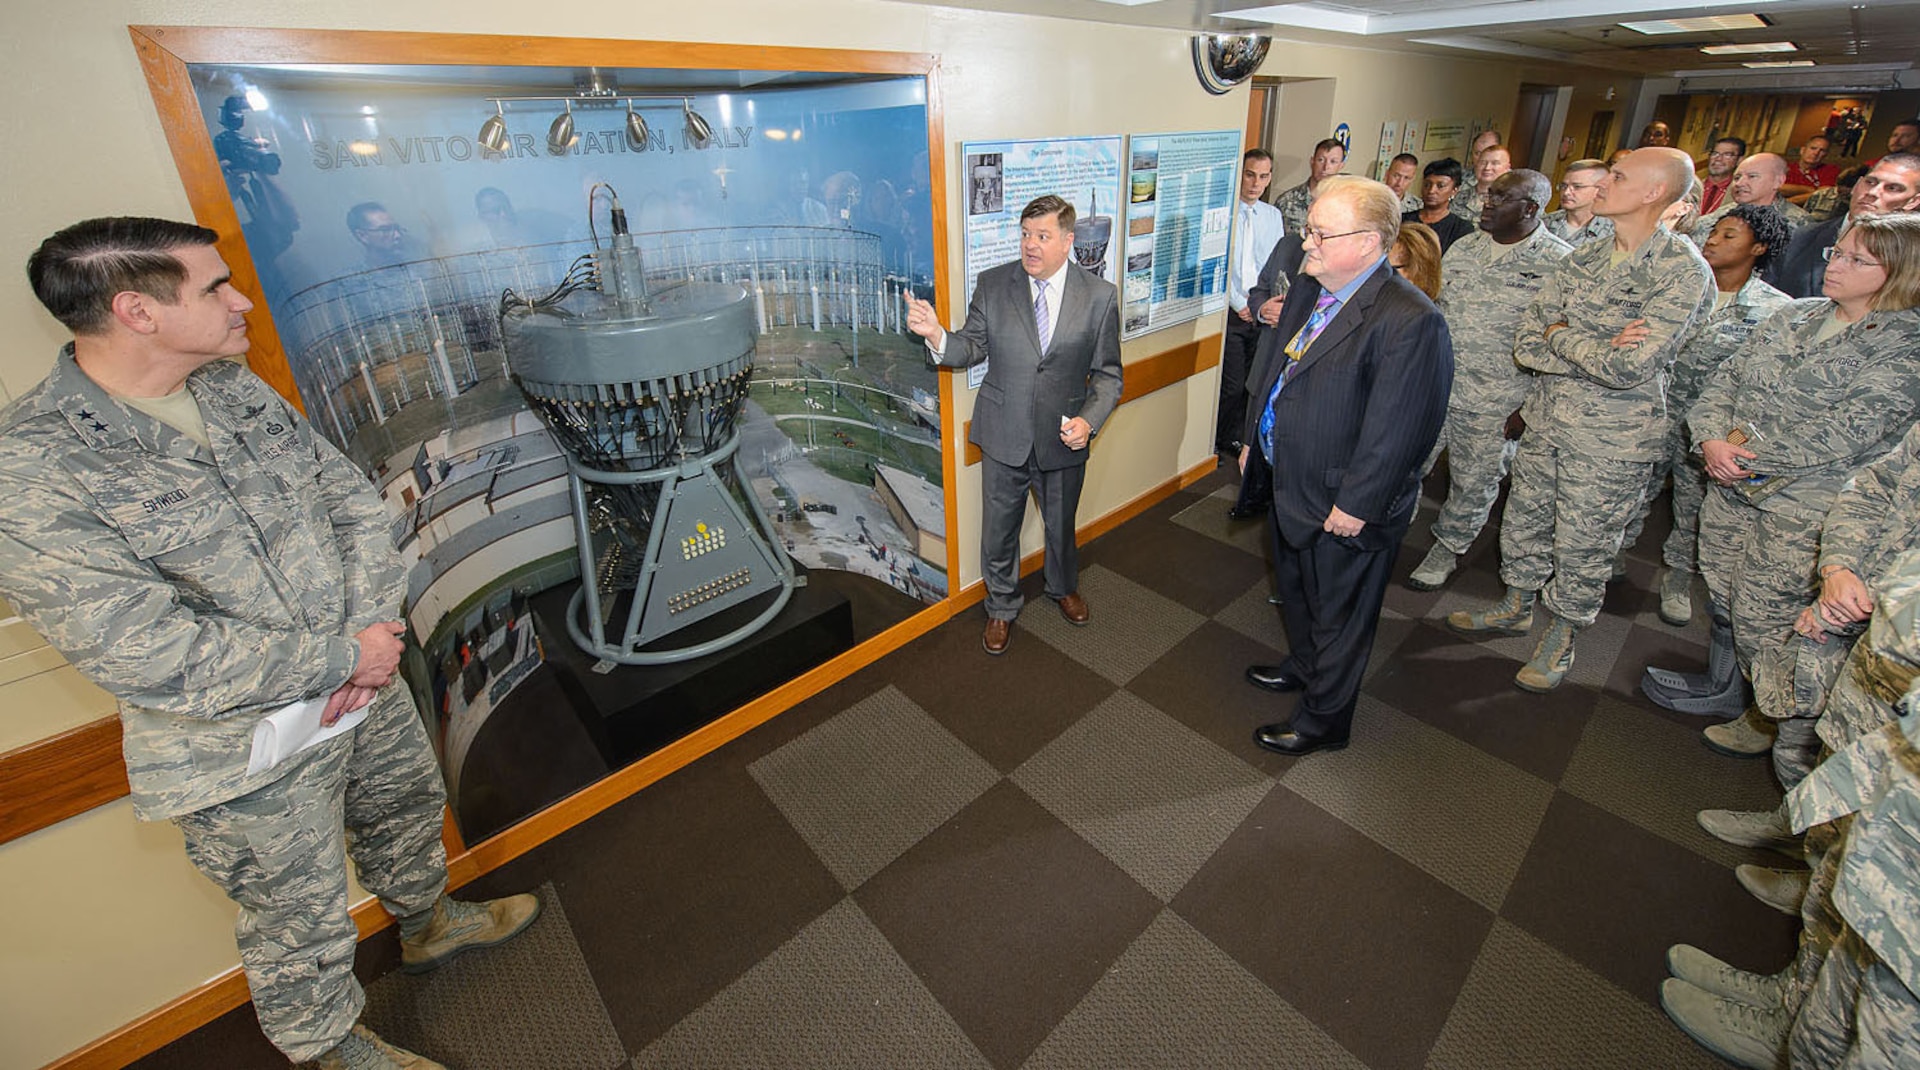 Mr. Gabriel Marshall, 25th Air Force directorate of history and research, explains the function of the goniometer to Maj. Gen. Bradford J. (BJ) Shwedo, 25th AF commander, and the crowd of Airmen during the unveiling ceremony September 25 in the main hallway of Bldg. 2000, Joint Base San Antonio-Lackland, Texas. (U.S. Air Force photo by William B. Belcher/released)
